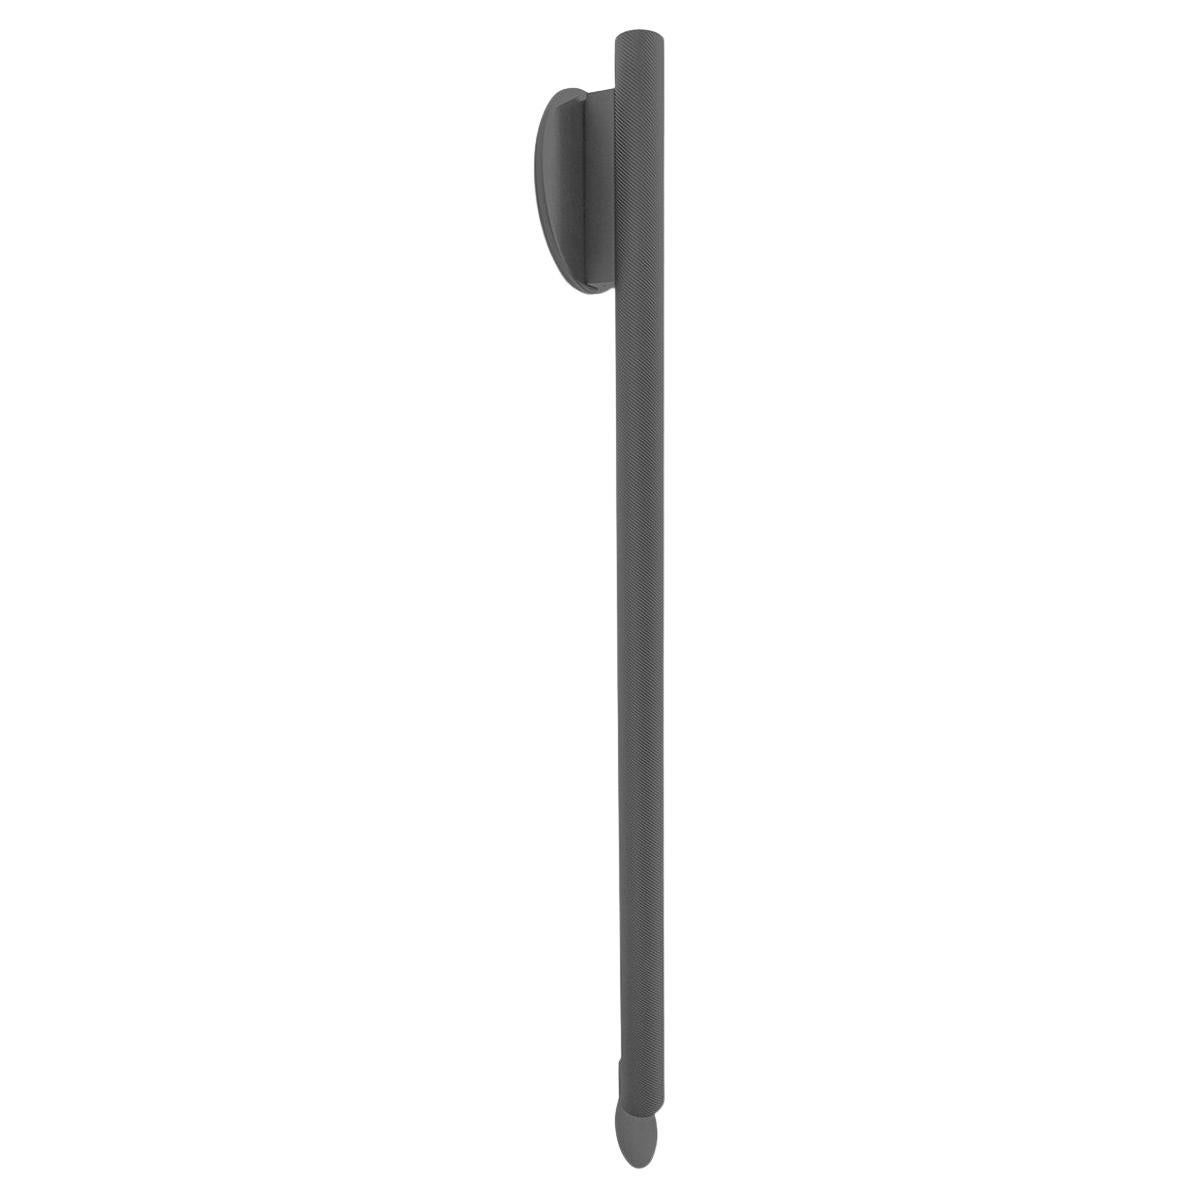 Flos Flauta Spiga Large Indoor/Outdoor Wall Sconce in Anthracite For Sale